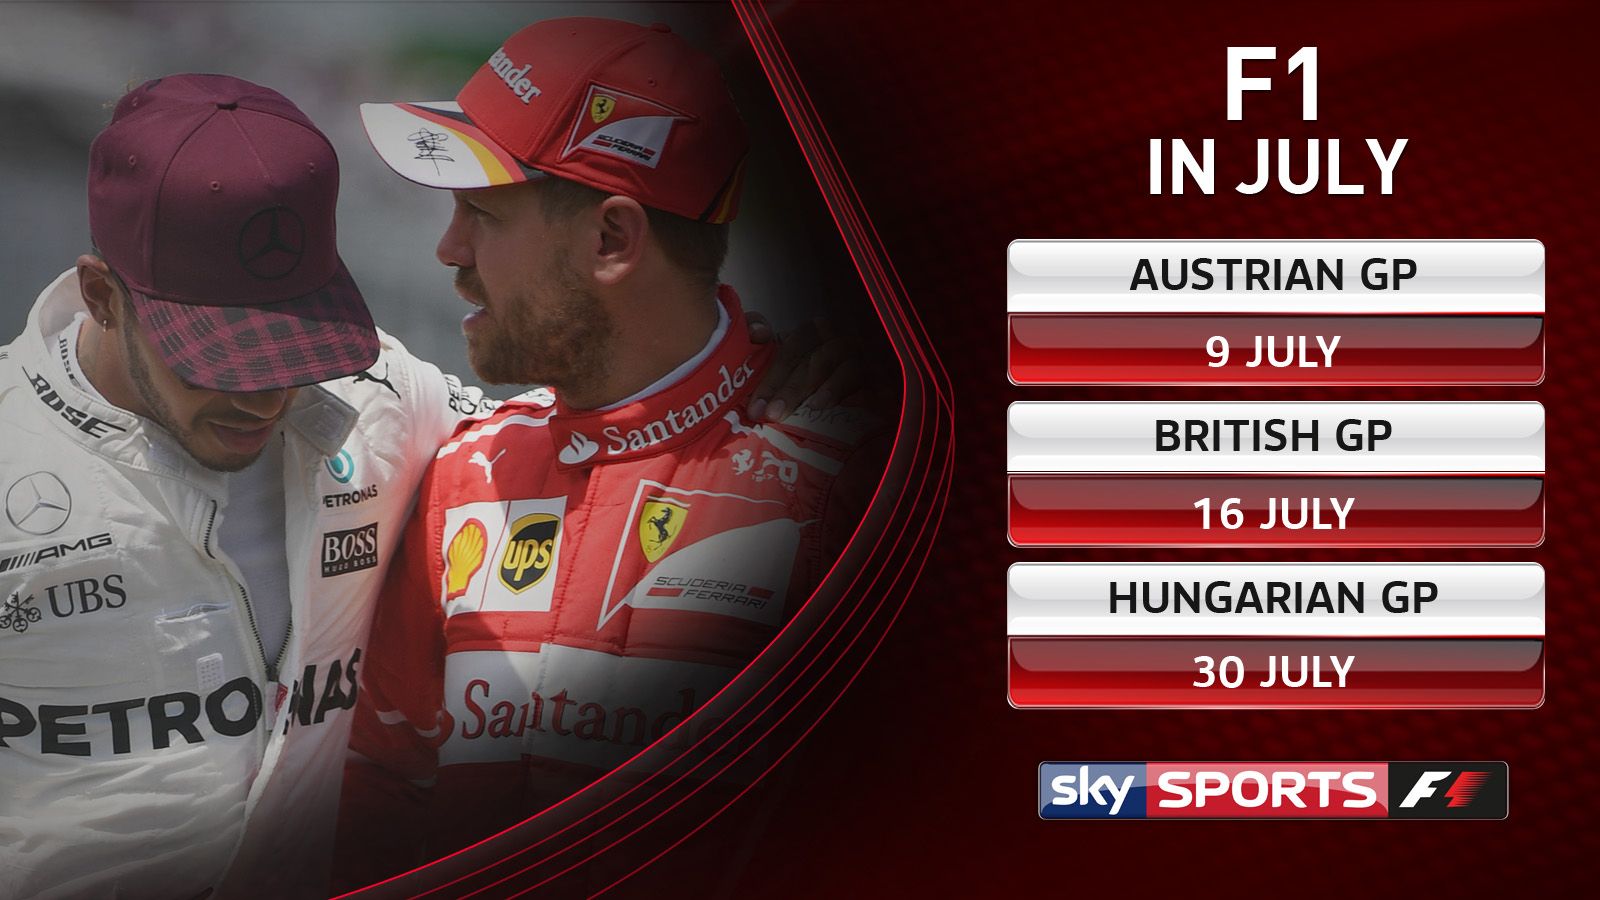 Watch the Austrian, British and Hungarian GPs live on Sky Sports F1